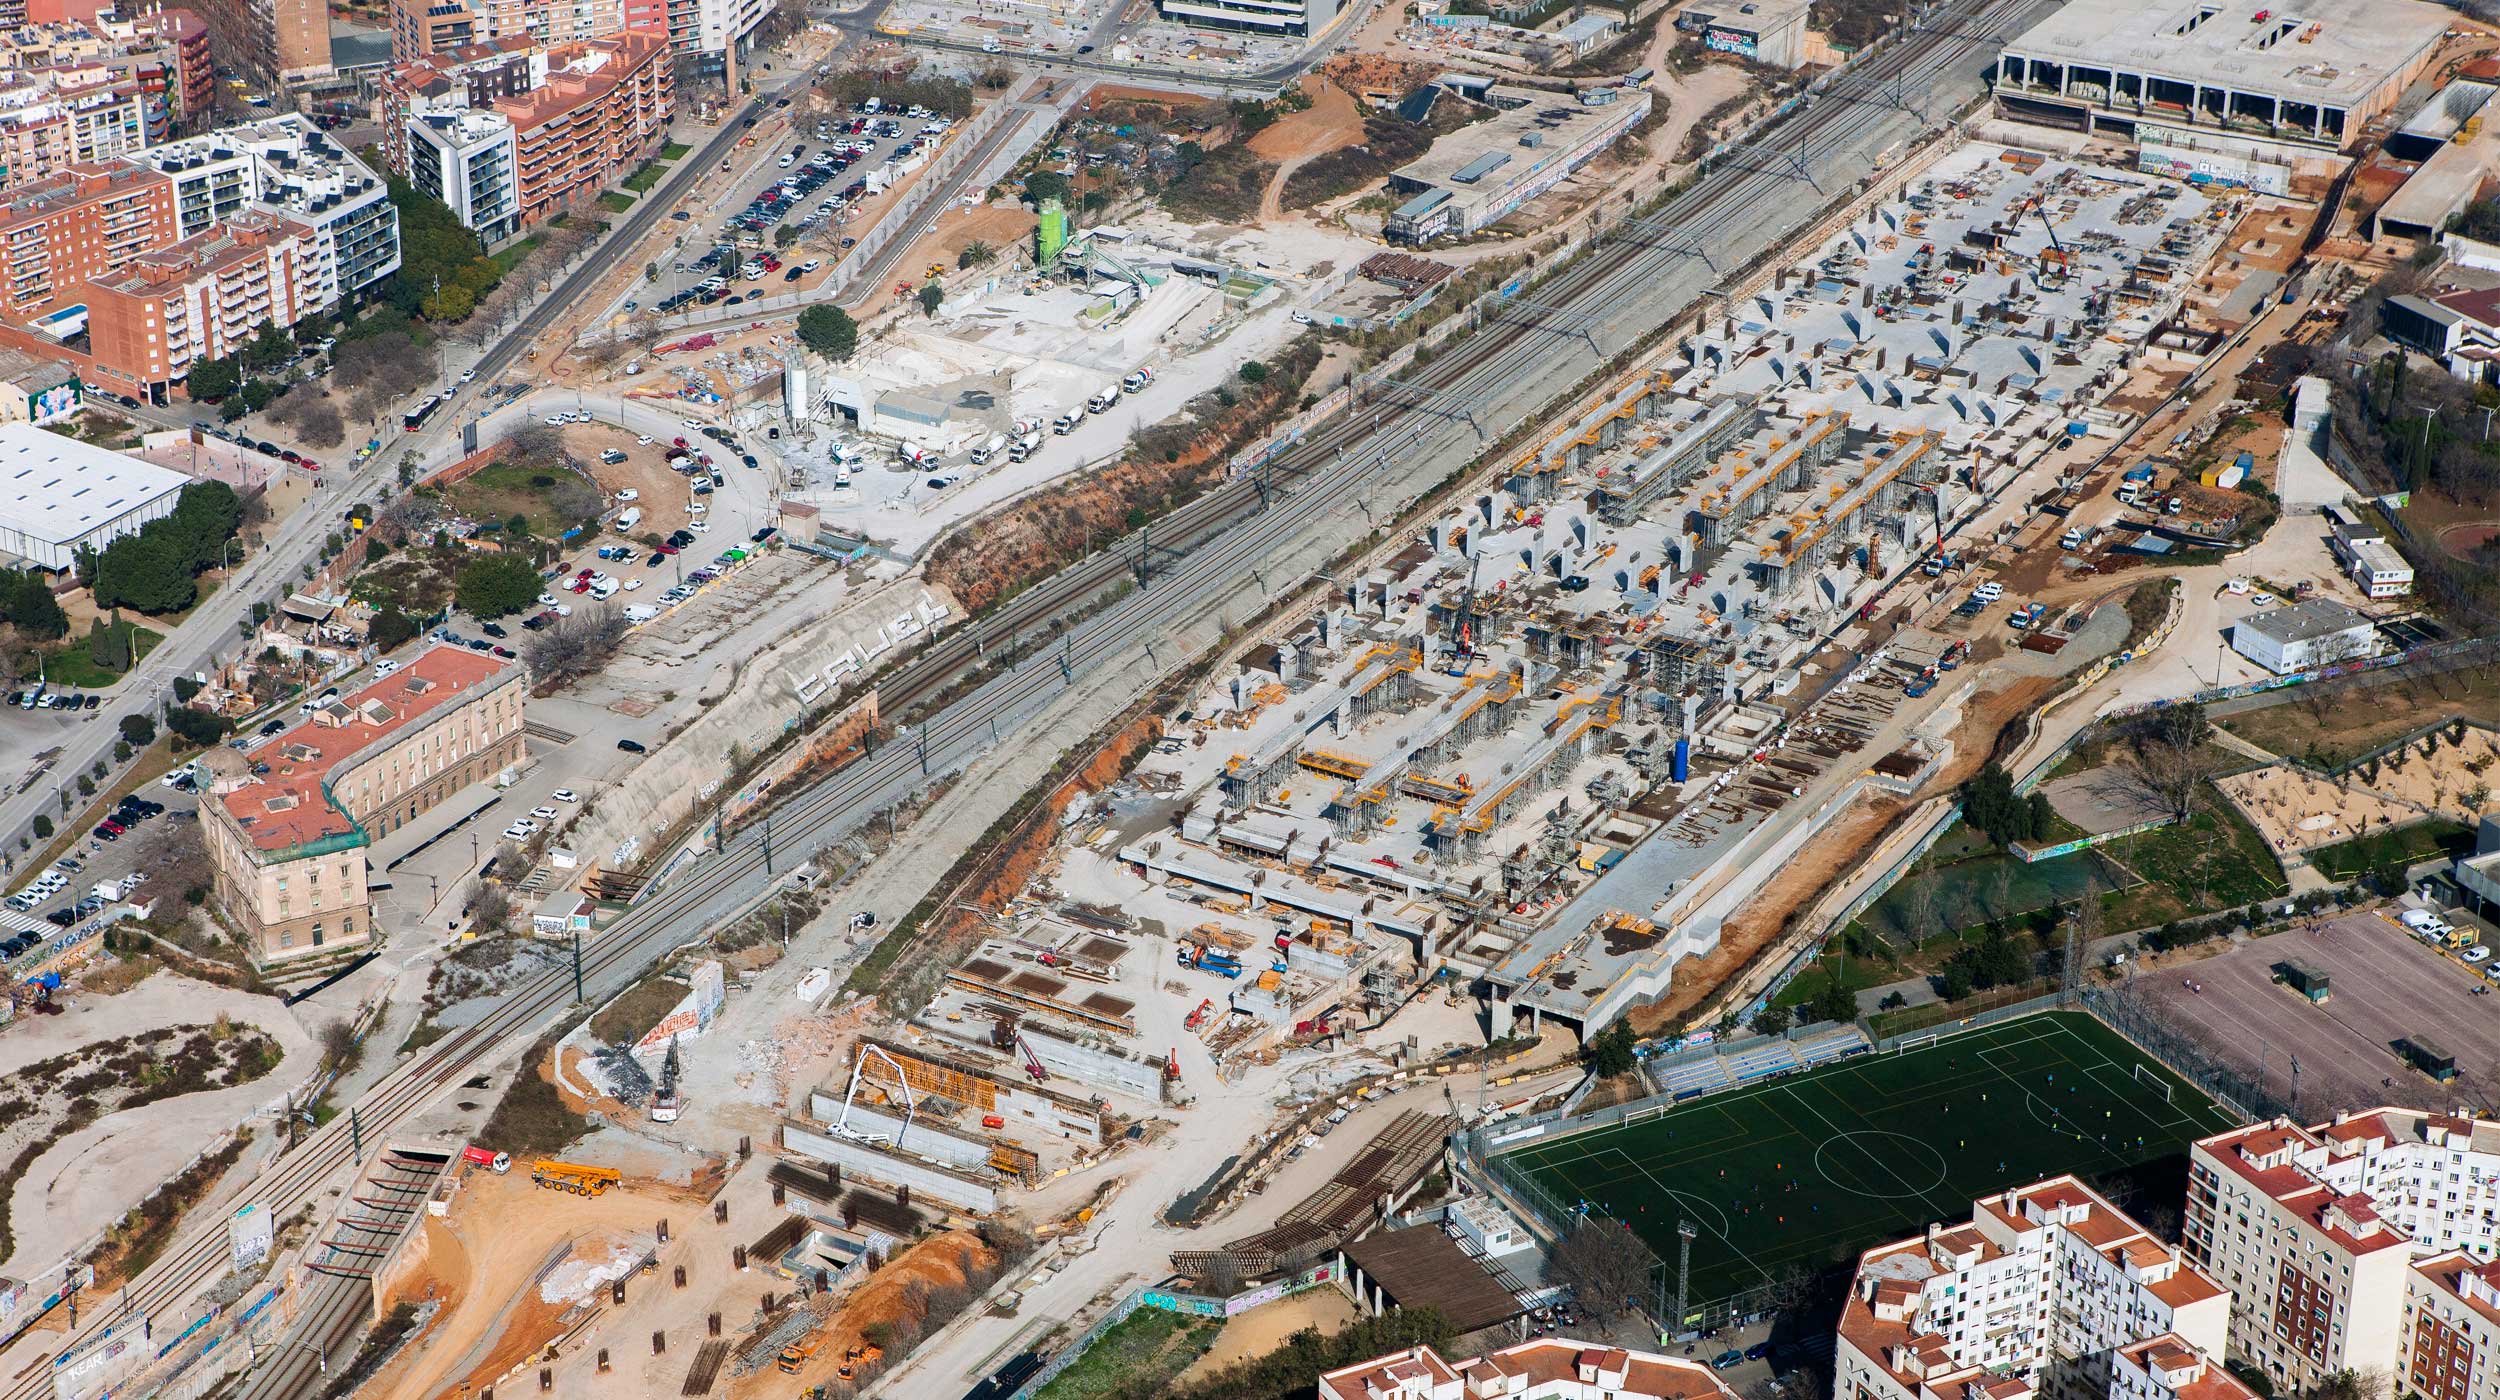 The new Sagrera Station is the most important infrastructure development to be built in Barcelona since the Olympic Games.